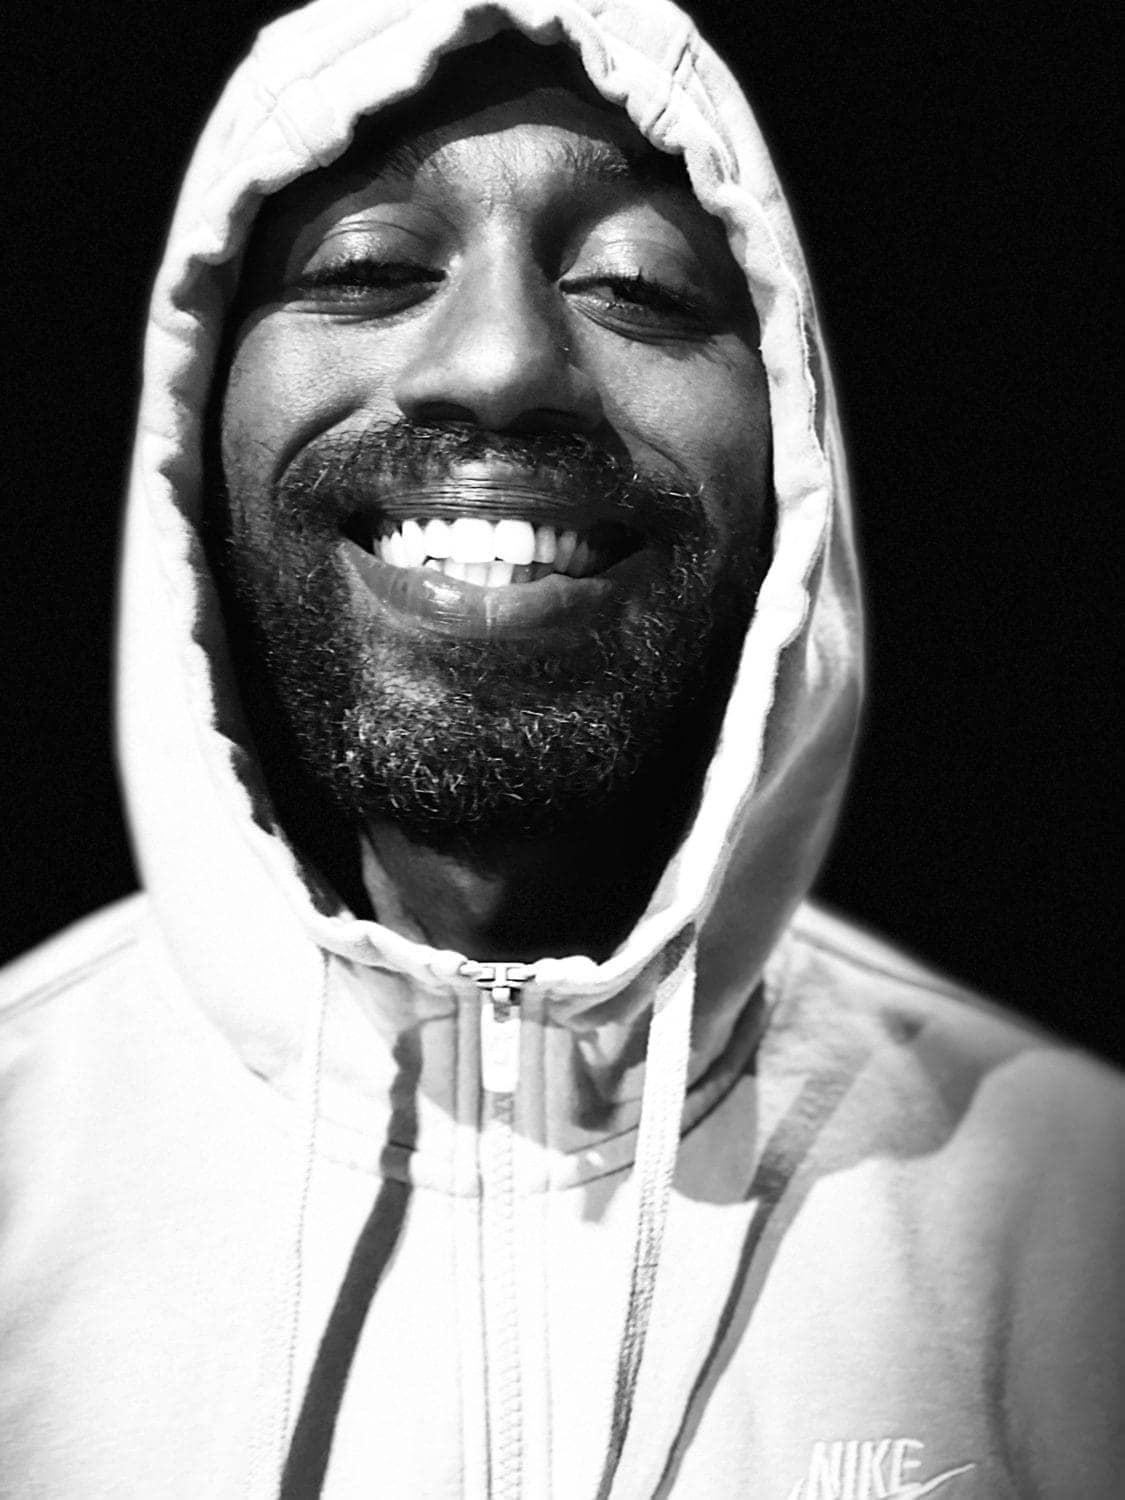 Spear-of-the-Nation, Oakland producer Spear of the Nation resurrects three-fourths of the Far Side, formerly Pharcyde, to record another album, Culture Currents News & Views 